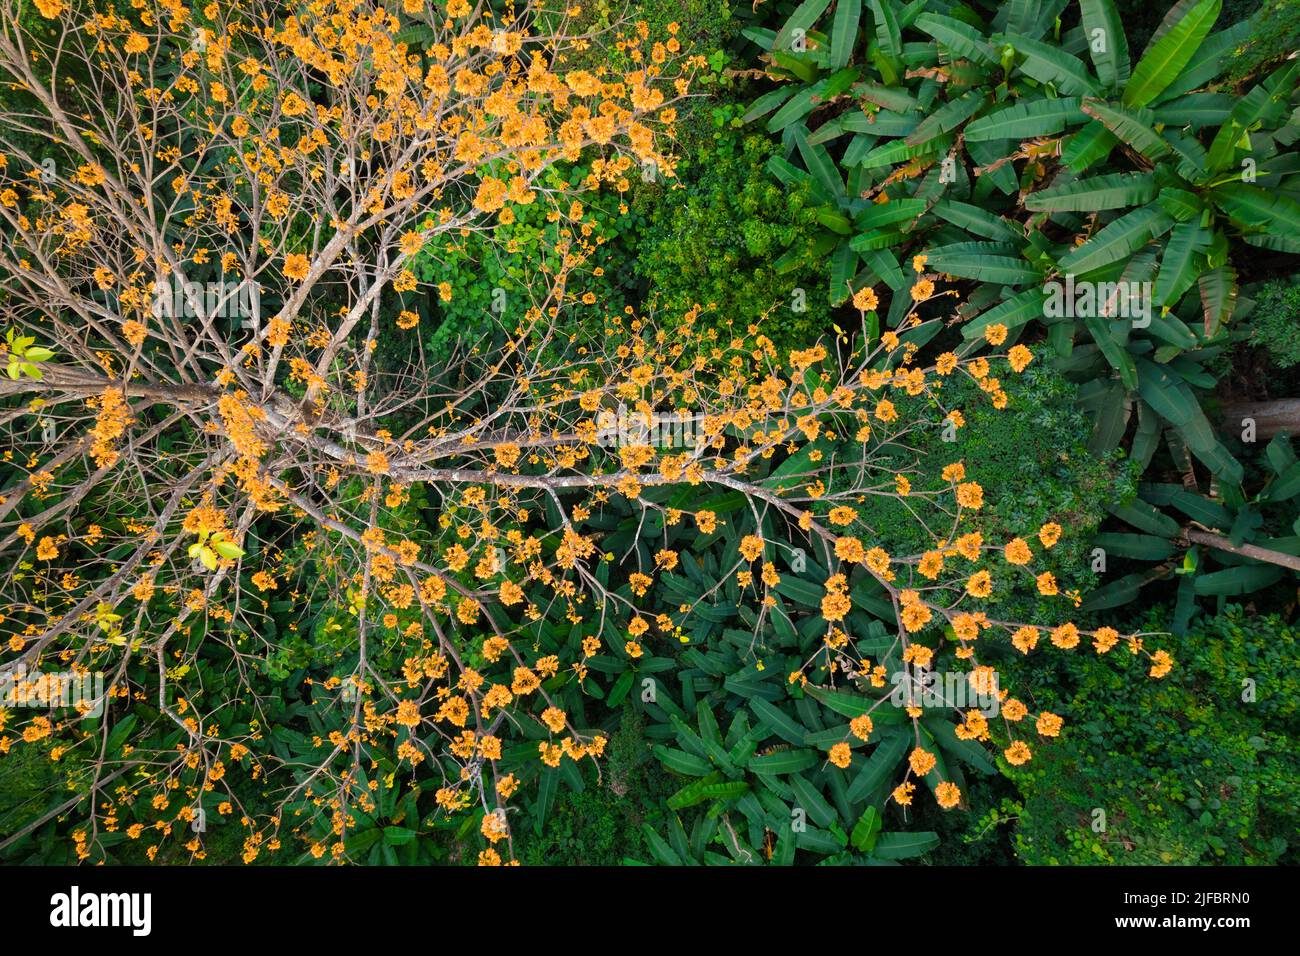 Aerial top view of a Pterocymbium macranthum. tree in full blossom, Chiang dao rainforest, Thailand Stock Photo